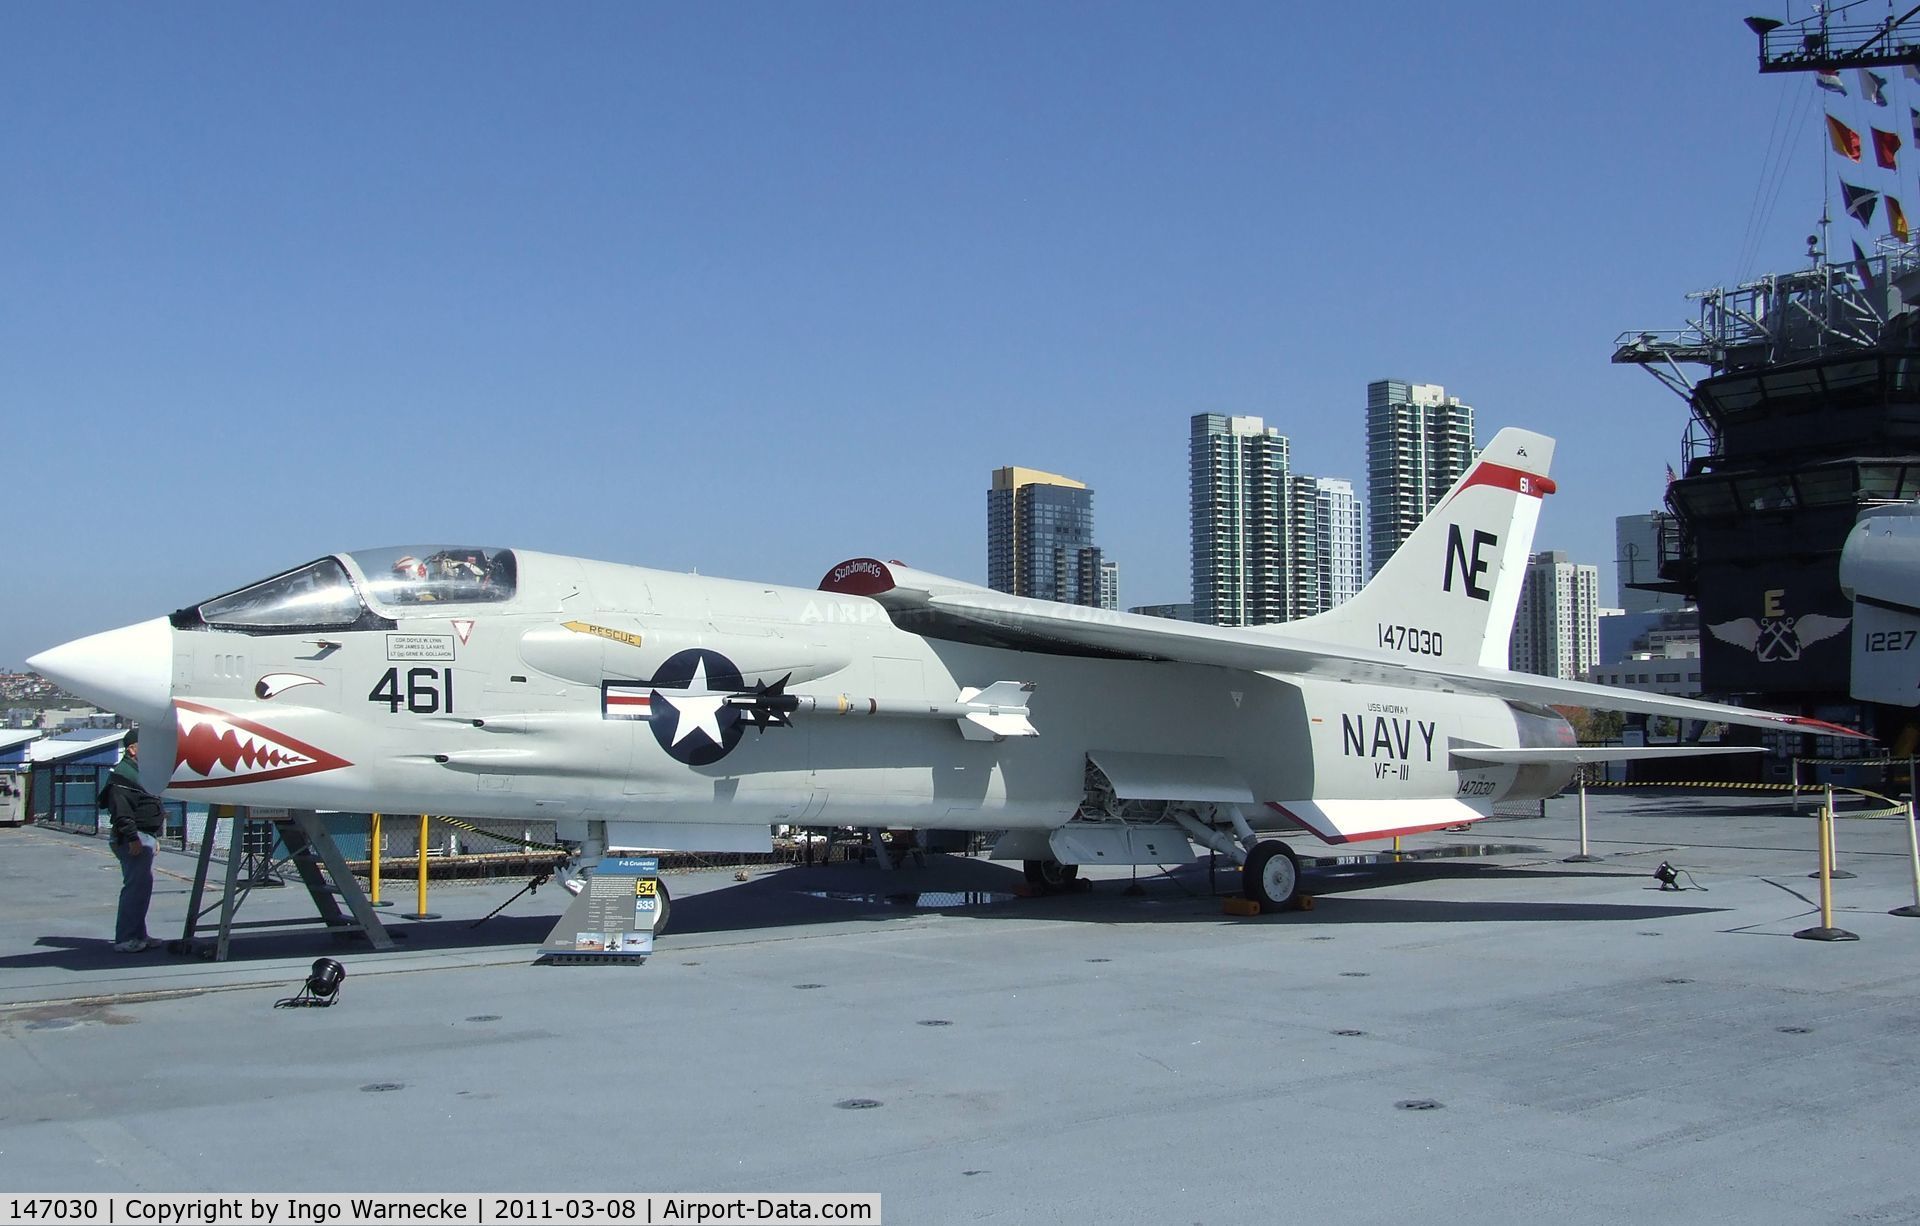 147030, Vought F-8K Crusader C/N 788, Vought F-8K Crusader on the flight deck of the USS Midway Museum, San Diego CA